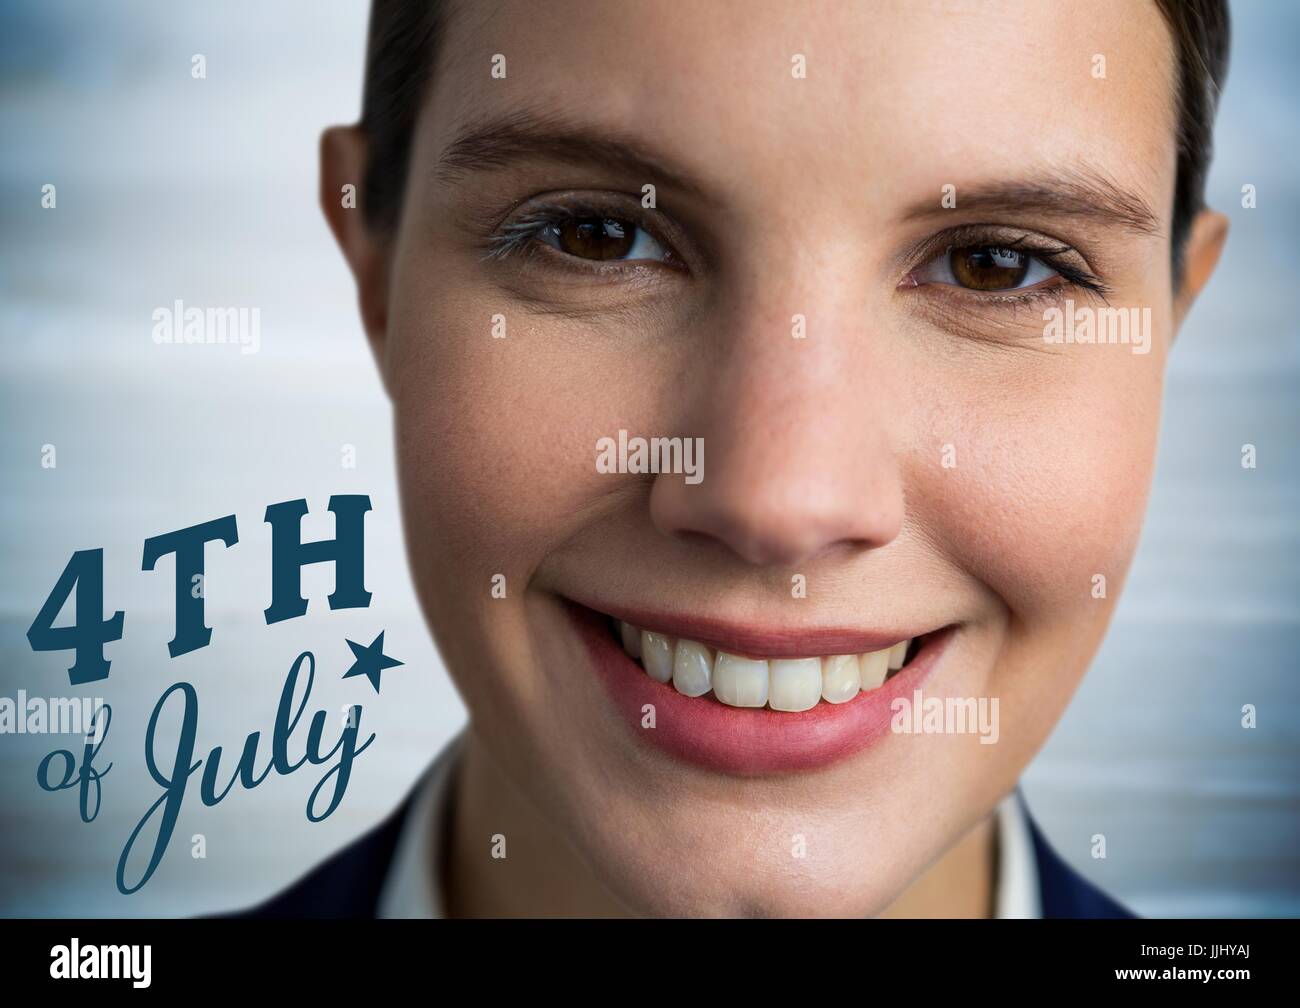 Portraiture of woman with blue fourth of July graphic against blurry blue wood panel Stock Photo